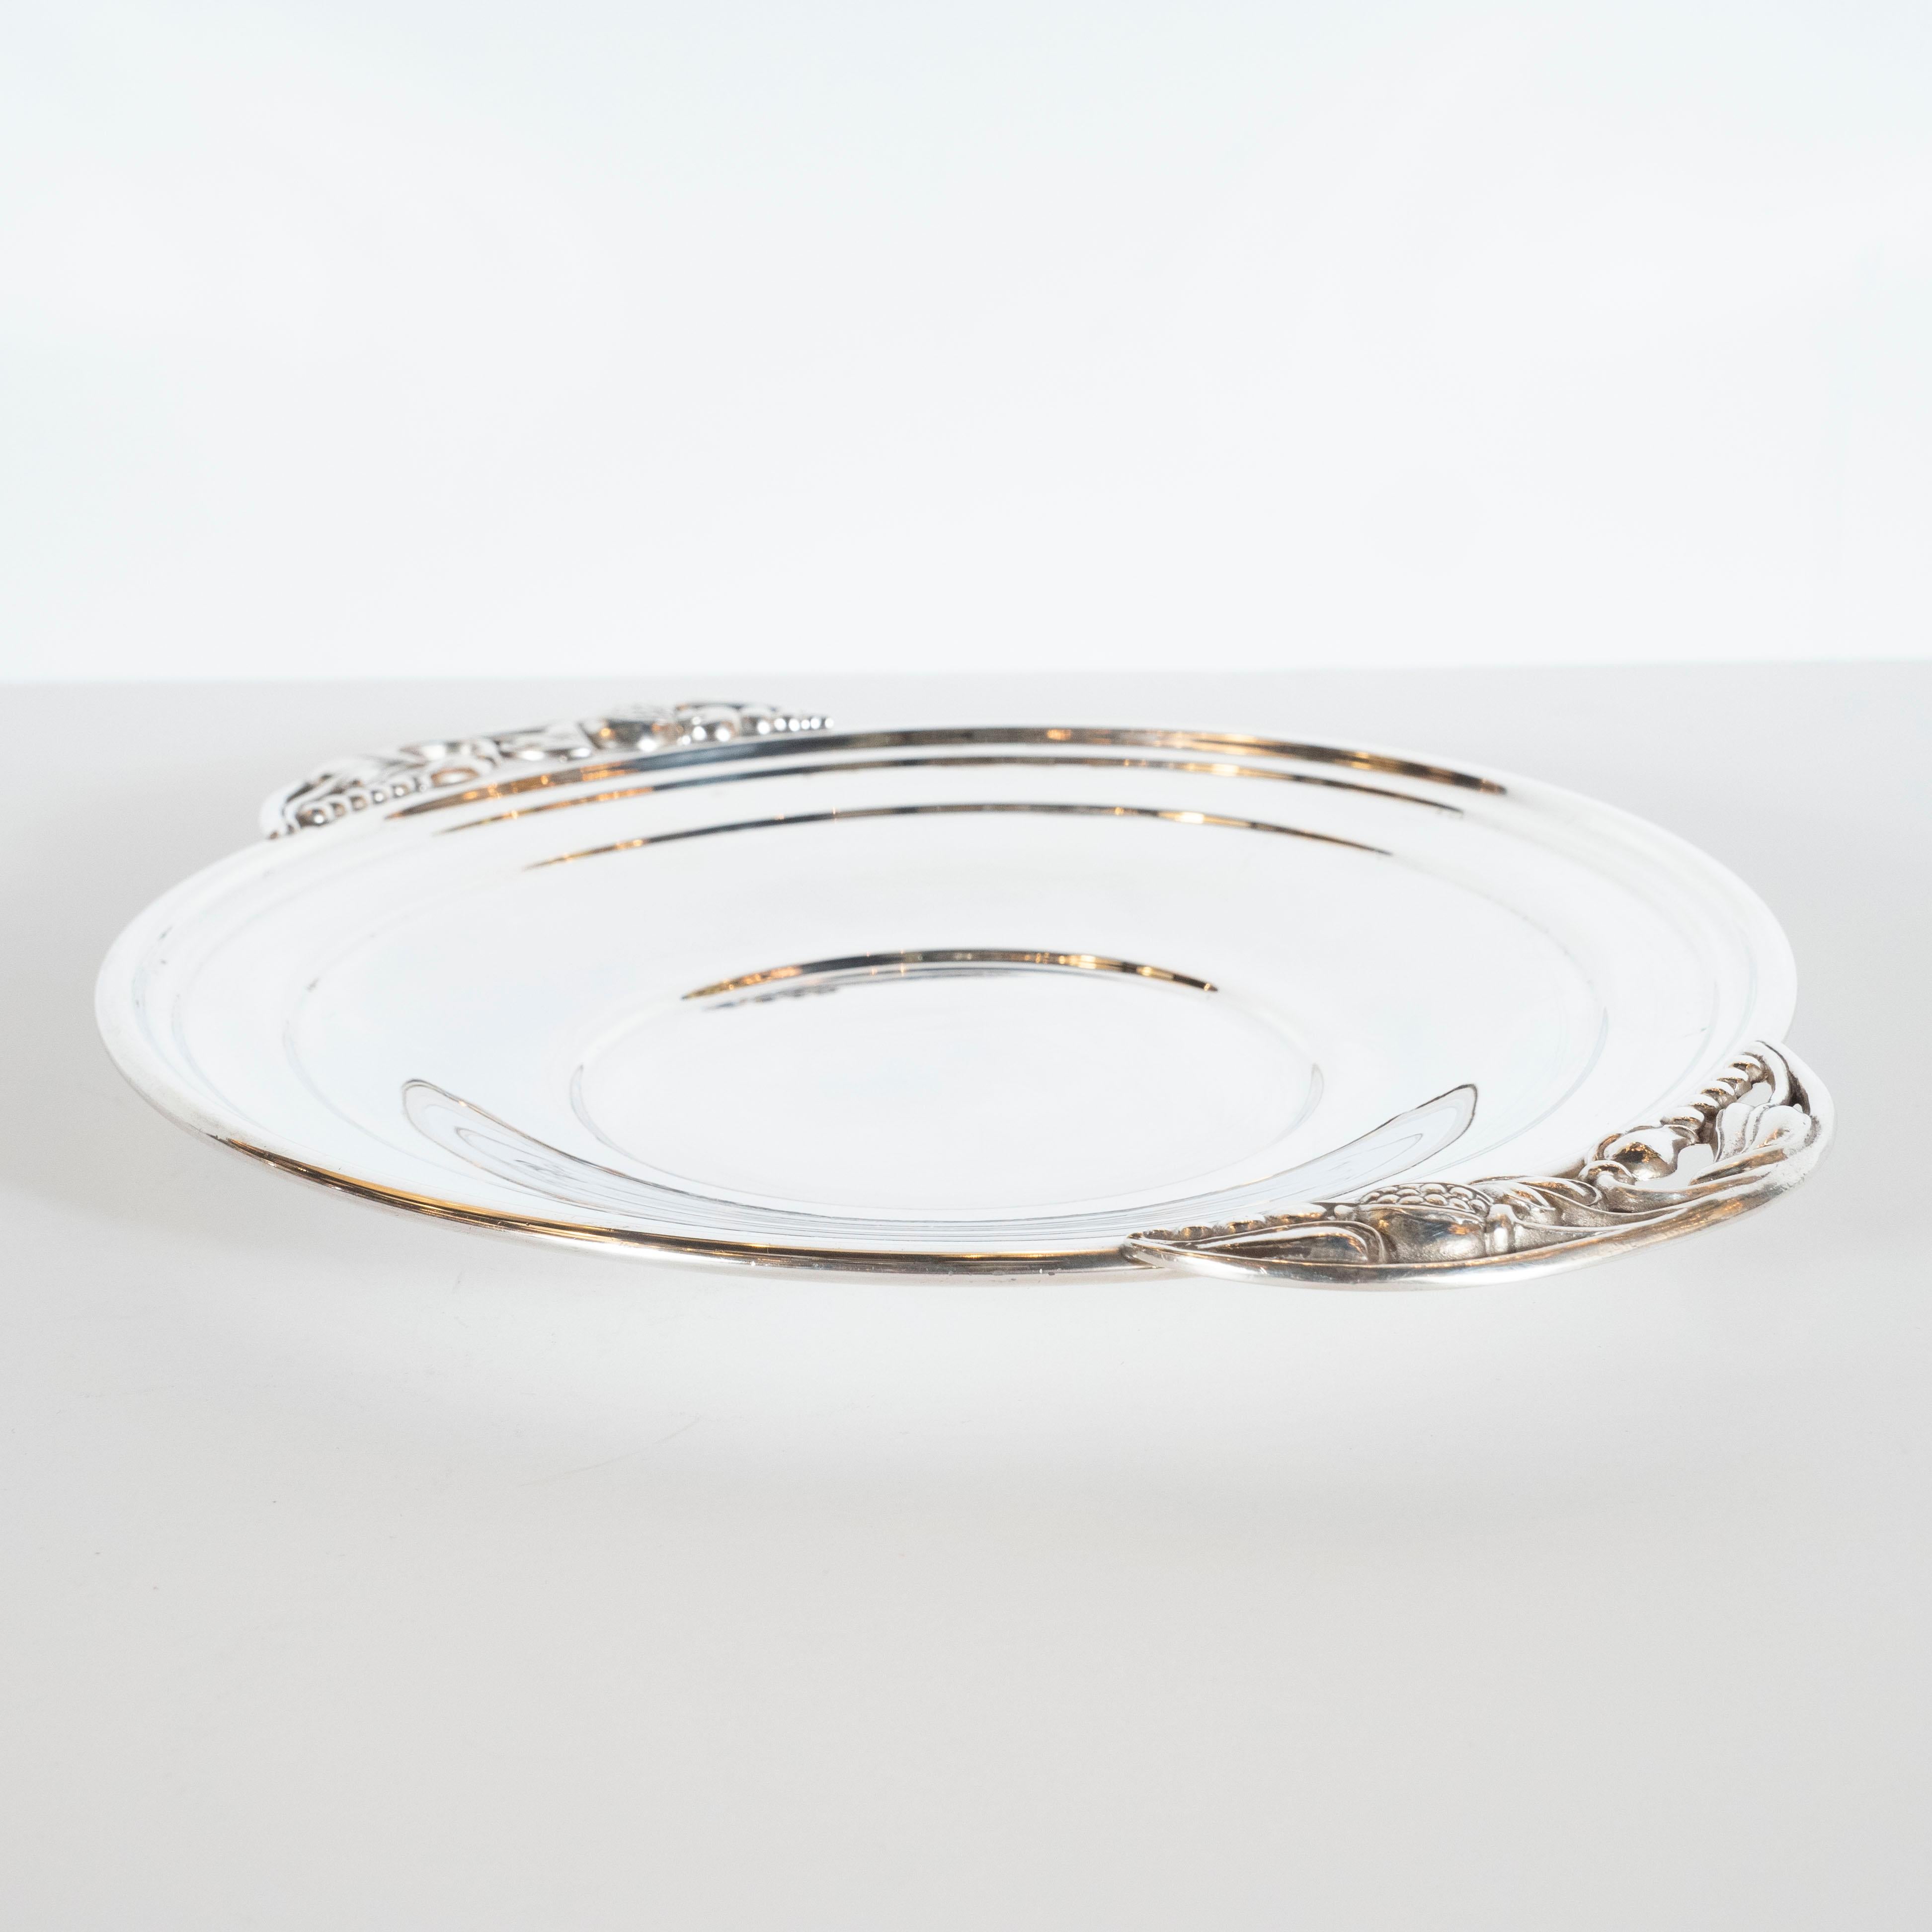 This beautiful sterling silver decorative tray was realized in Great Britain, circa 1950. It features a circular centre with rounded scalloped sides that offer stylized grape and vine detailing in the interstices between the adjoining sides. The